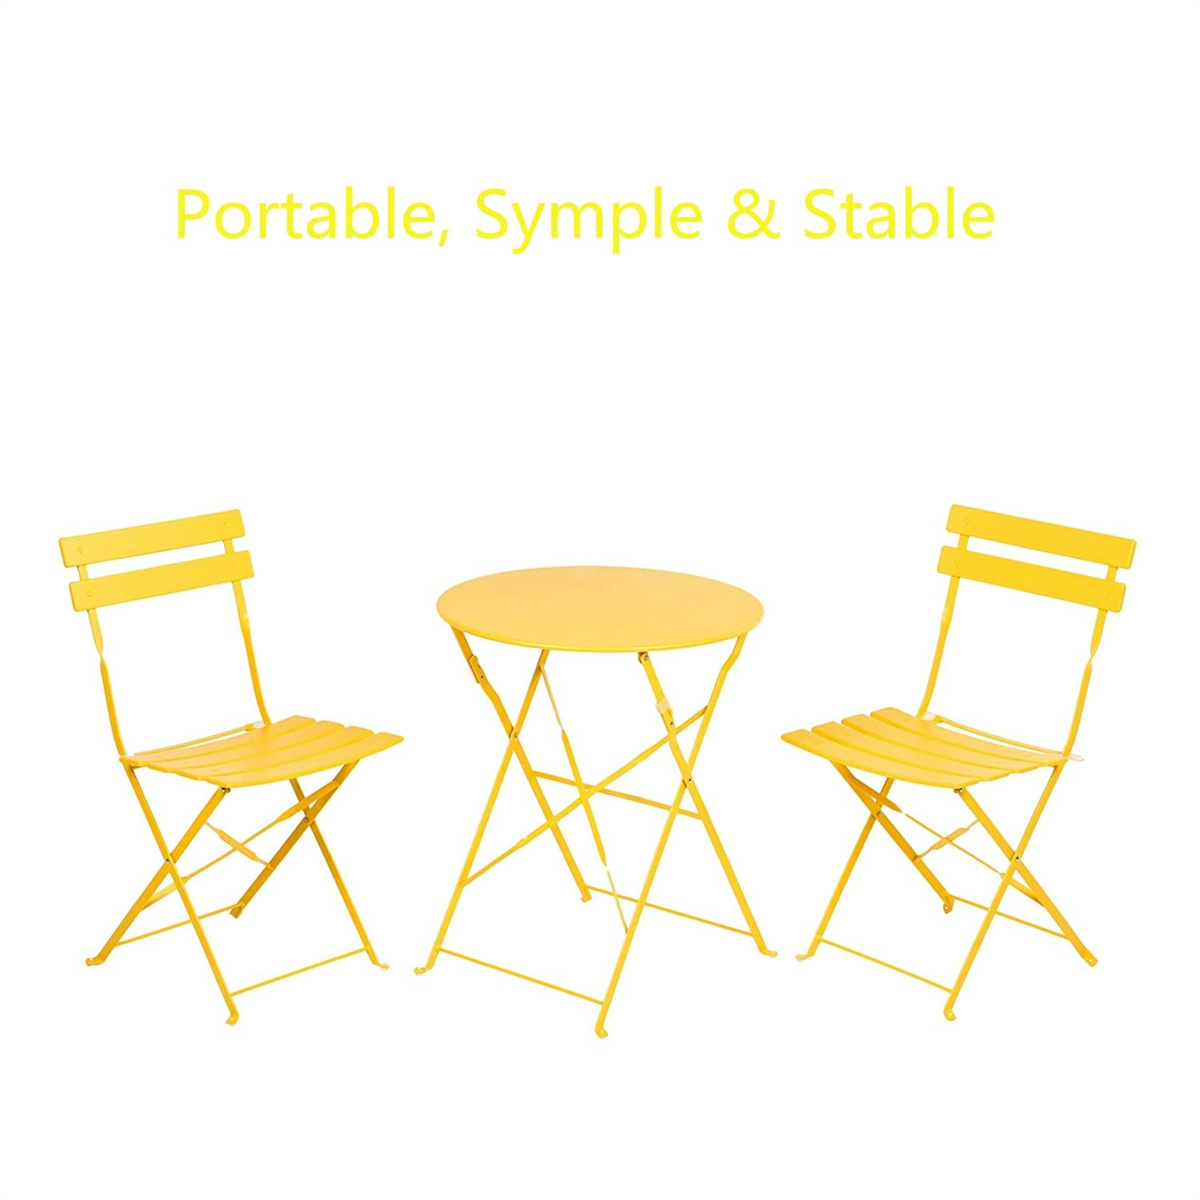 2 Person Bistro Set with 23.6" L Round Side Table & 2 Metal Chairs, 3 Pieces Retro Porch Furniture Set with Powder Coated Steel Frame for Outdoors, No Assembly Required, Yellow - image 4 of 5